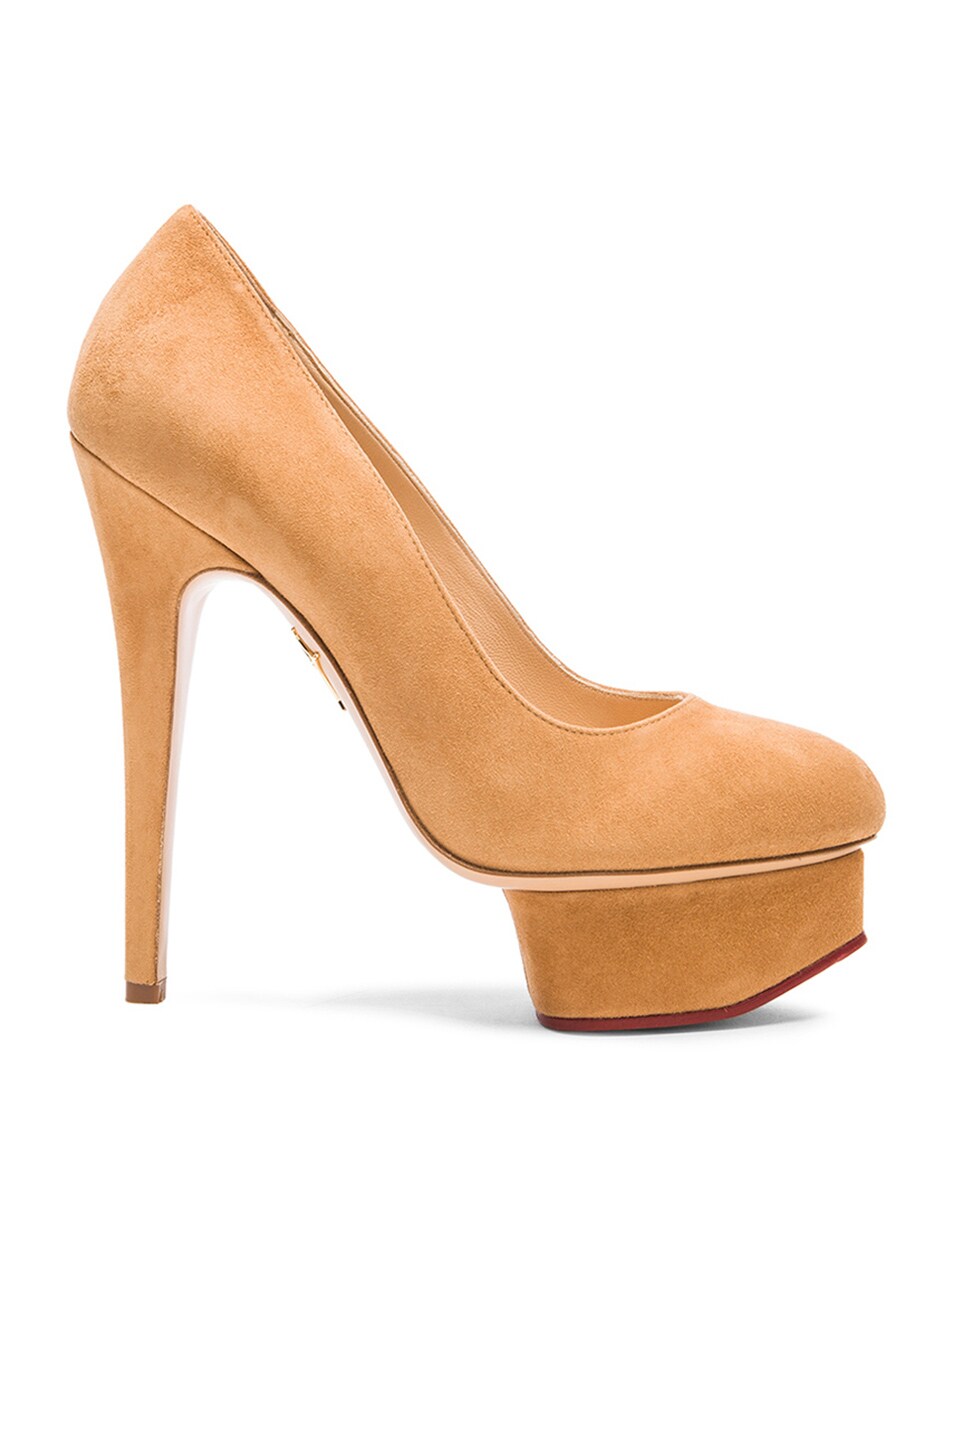 Image 1 of Charlotte Olympia Suede Sundance Dolly Pumps in Wheat